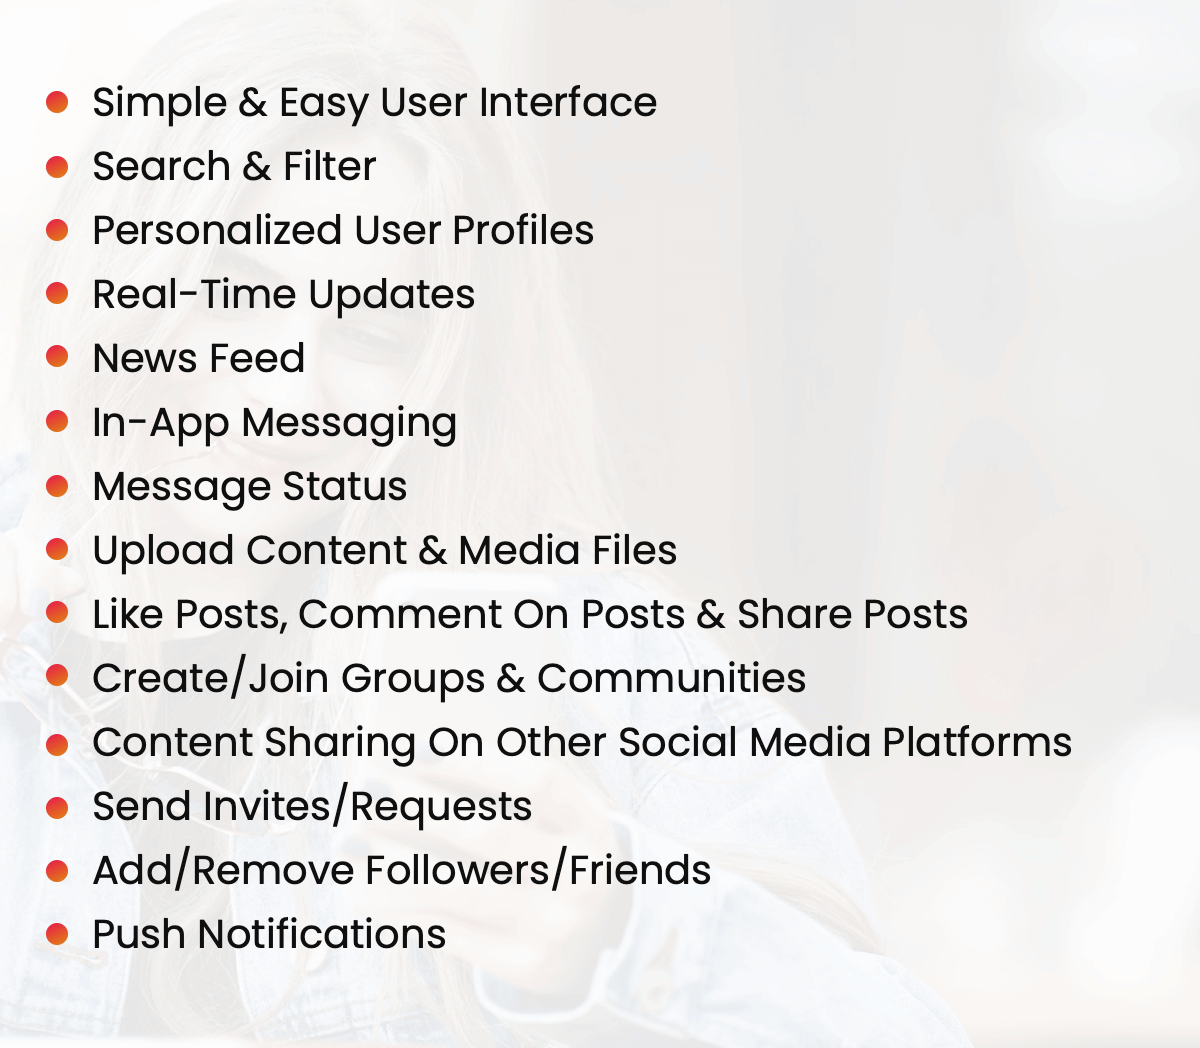 Typical Features That A Social Media App Must Have